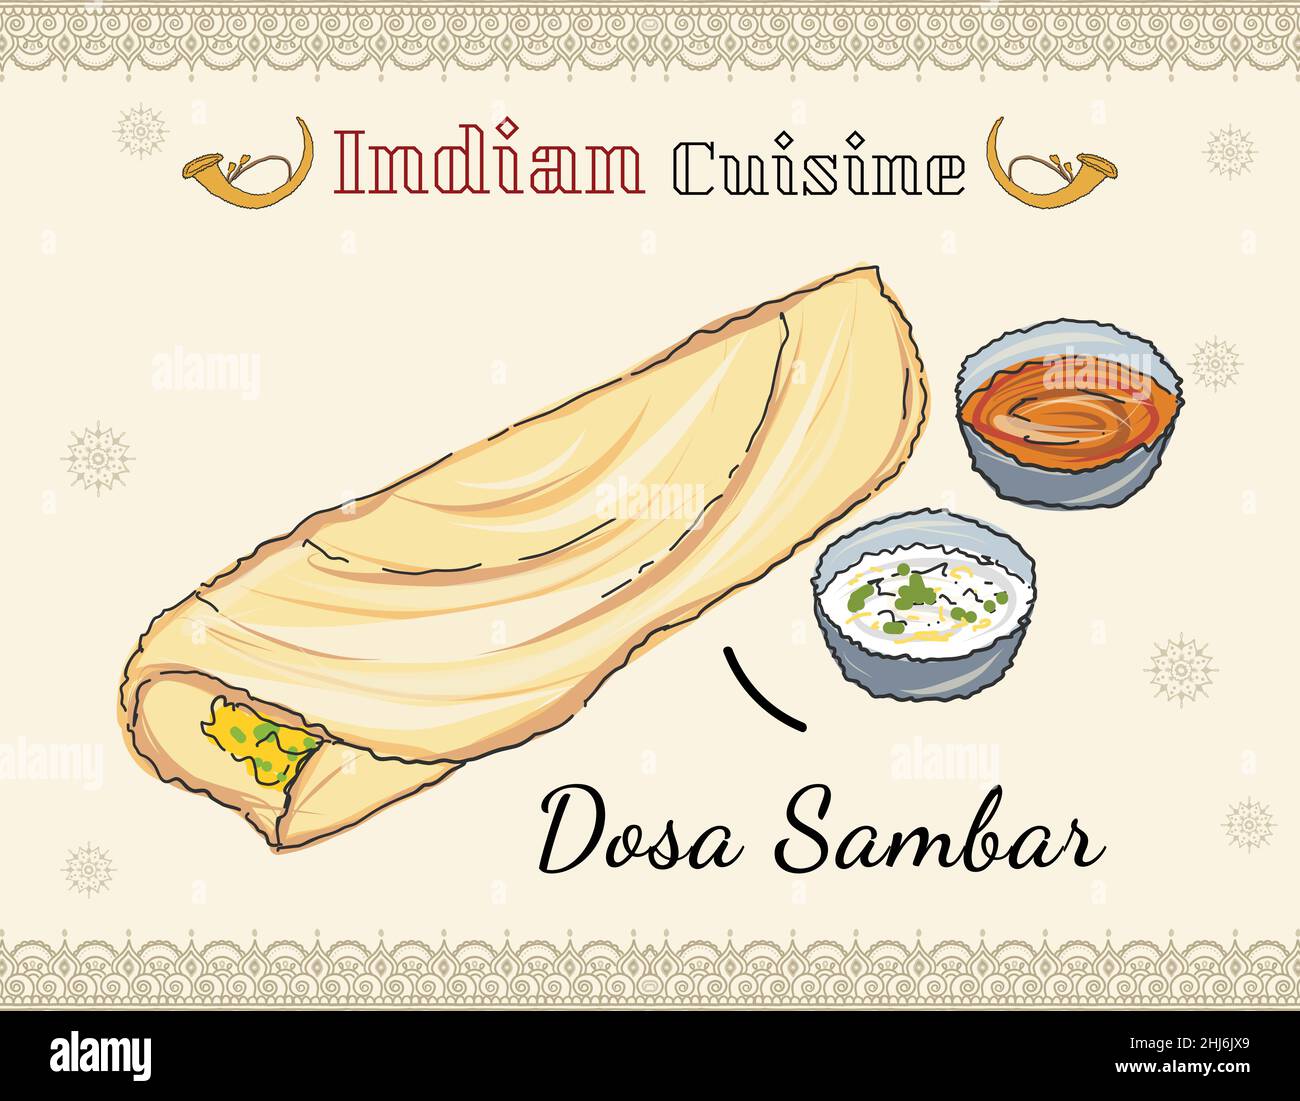 Paper Masala dosa, South Indian traditional meal served with sambhar and coconut chutney. Traditional South Indian food. Stock Vector